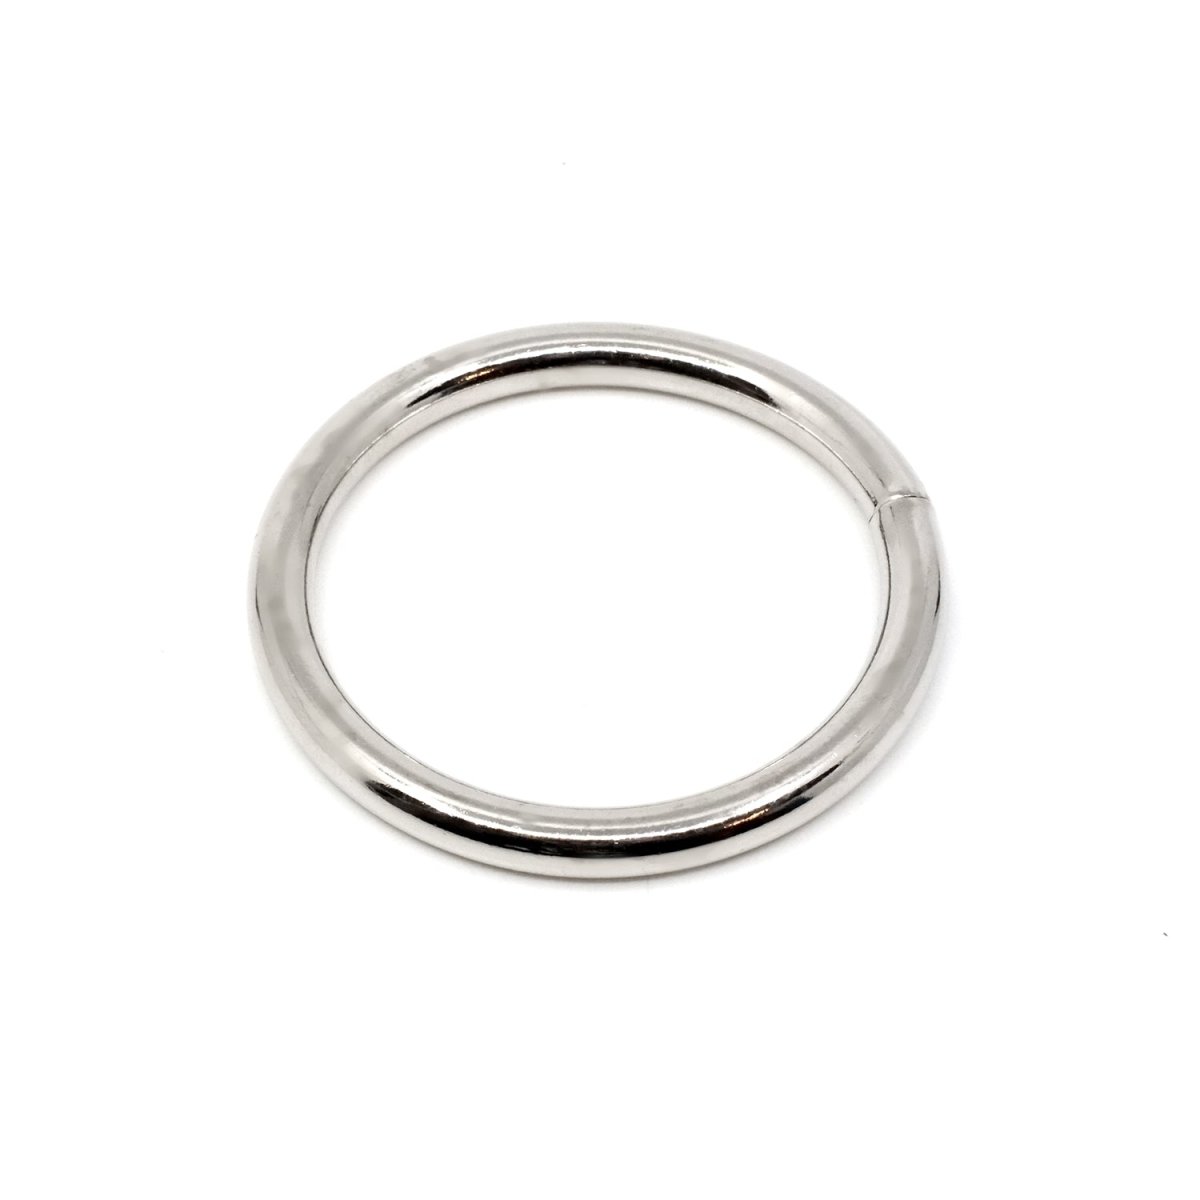 Connecting ring made of nickel-plated steel